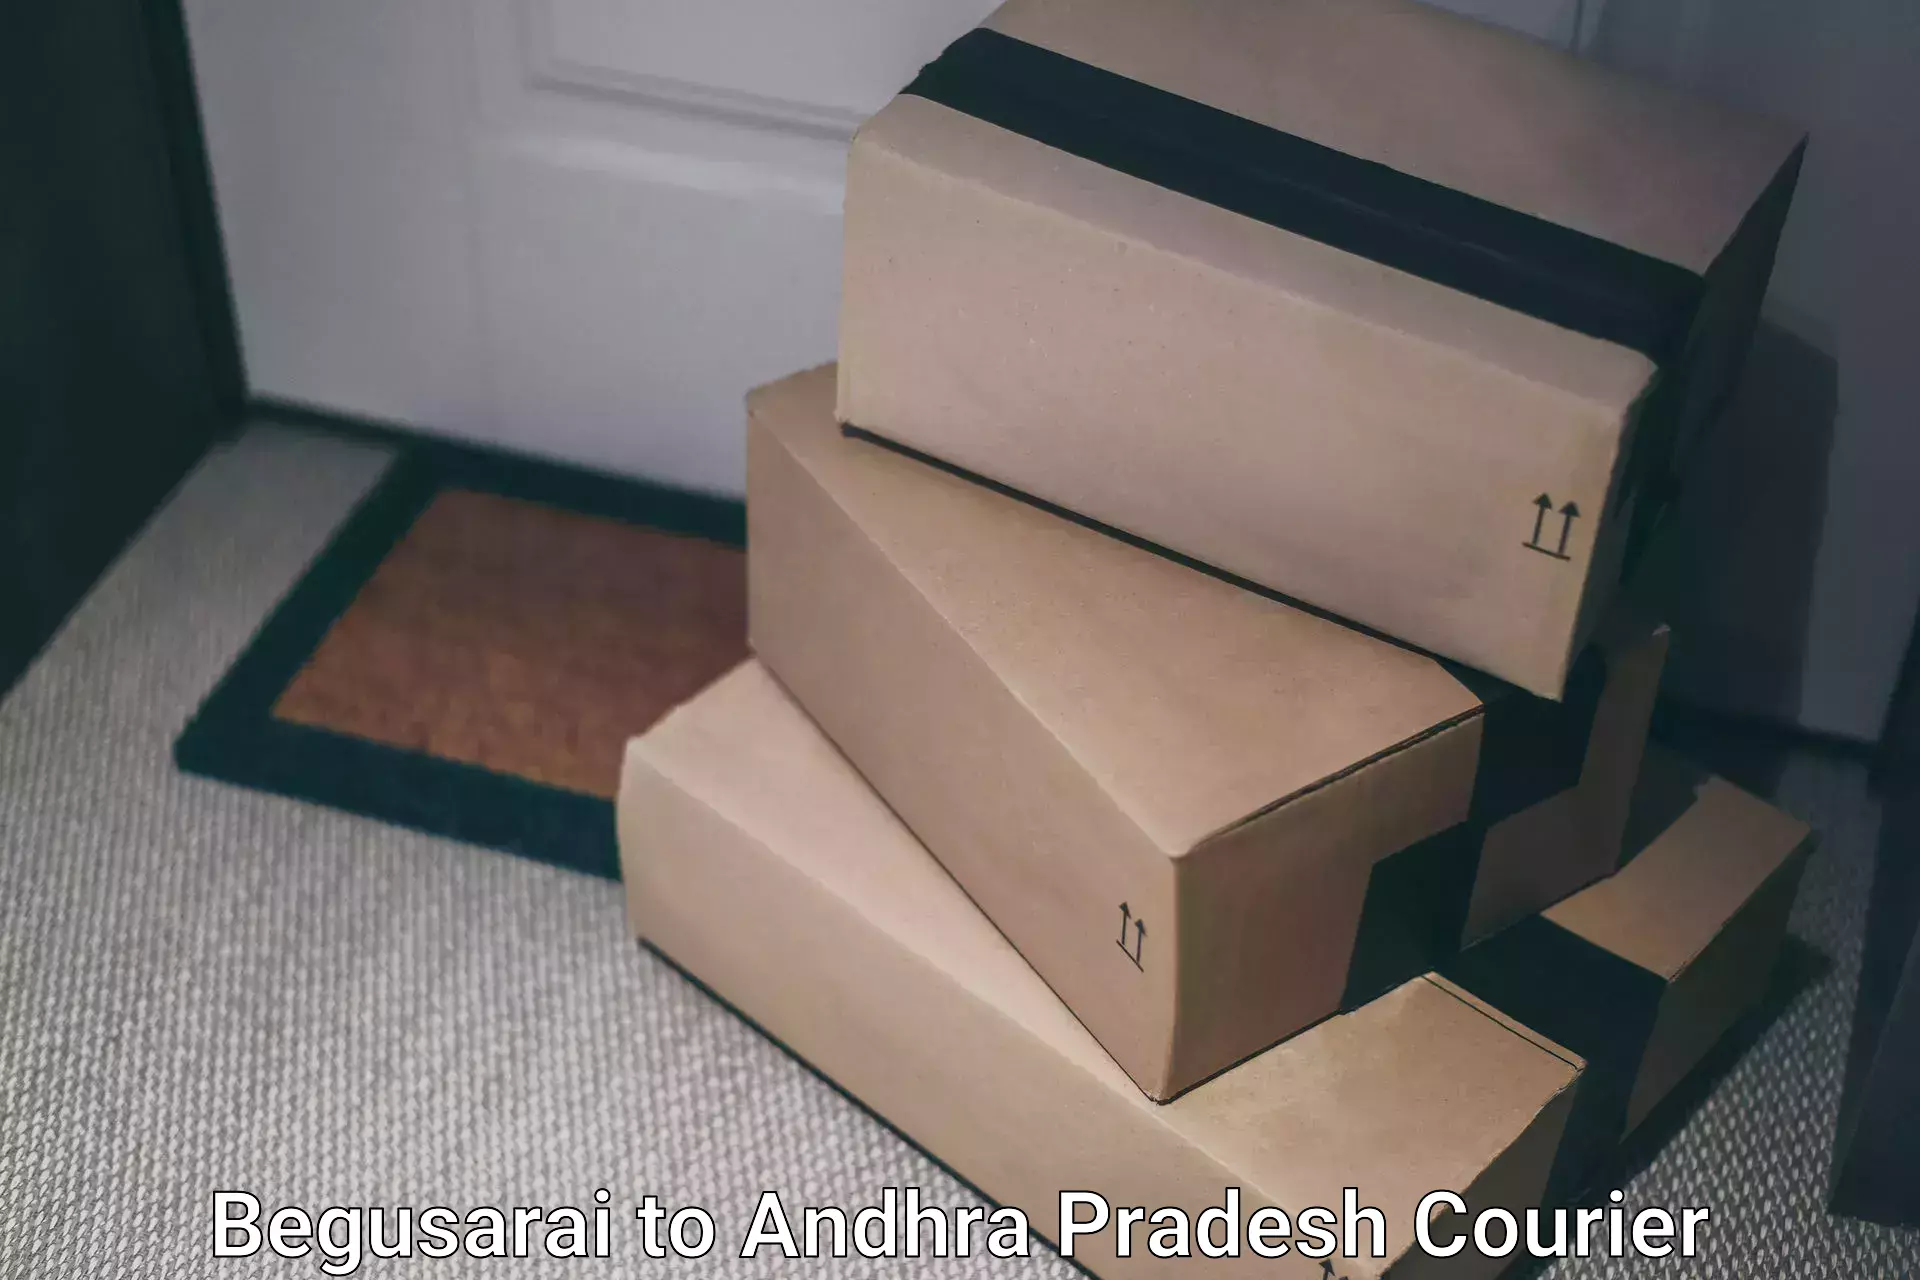 Ground shipping in Begusarai to Pathapatnam